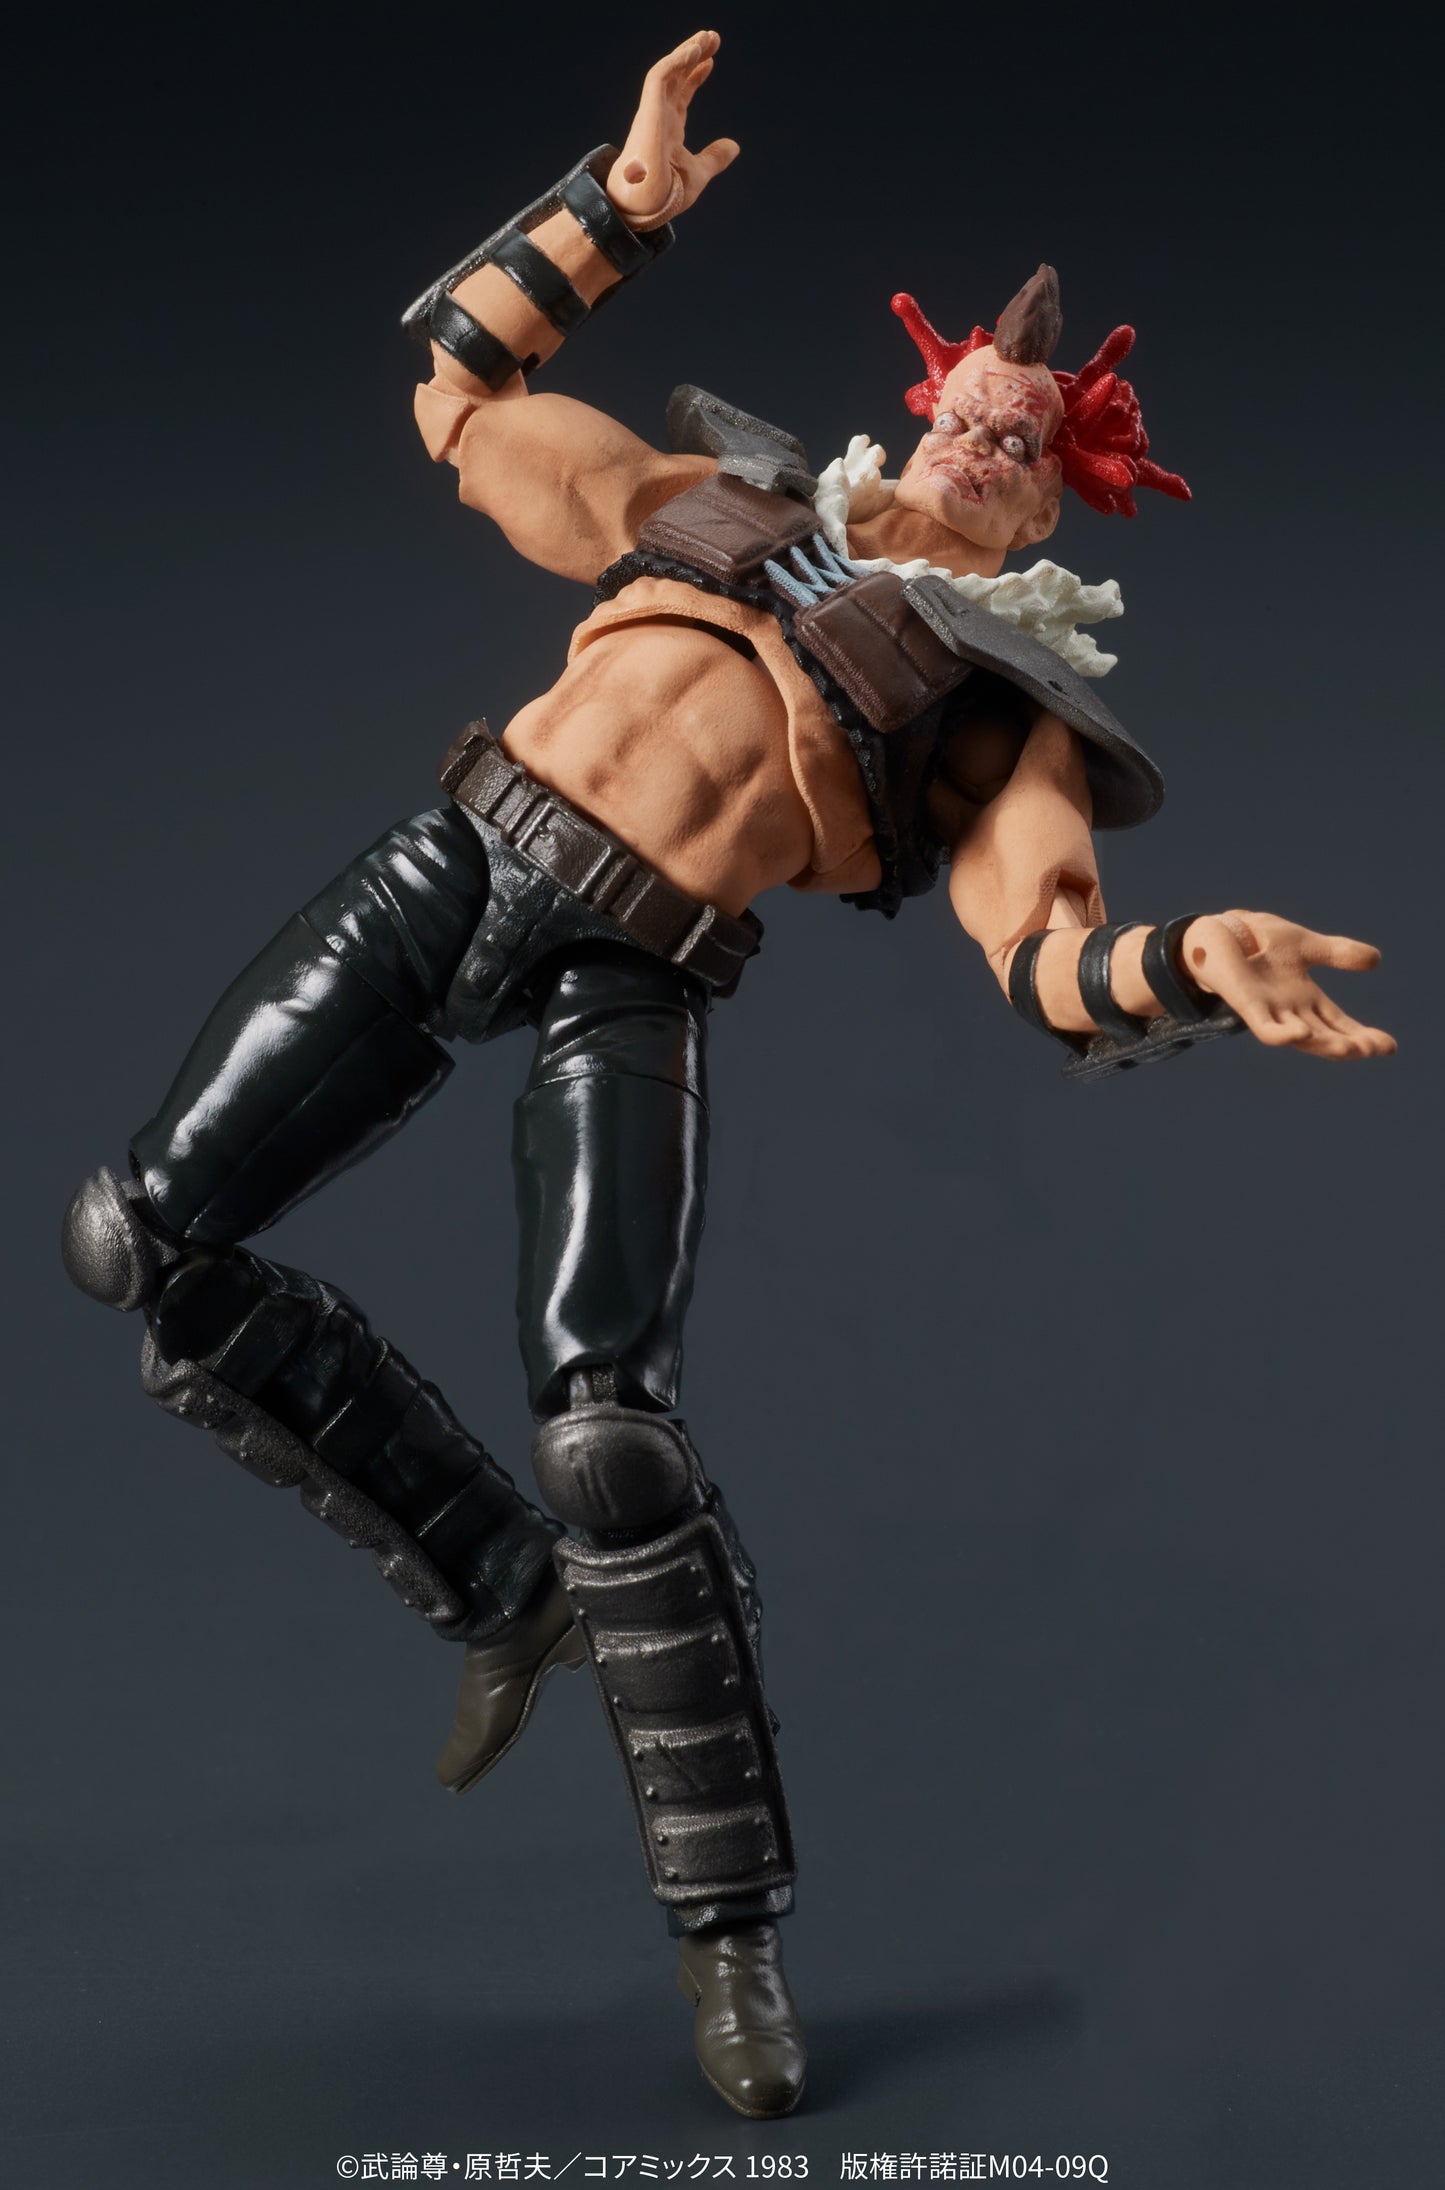 [Pre-order] Fist of the North Star - Zeed Member 1/24 - DIGACTION